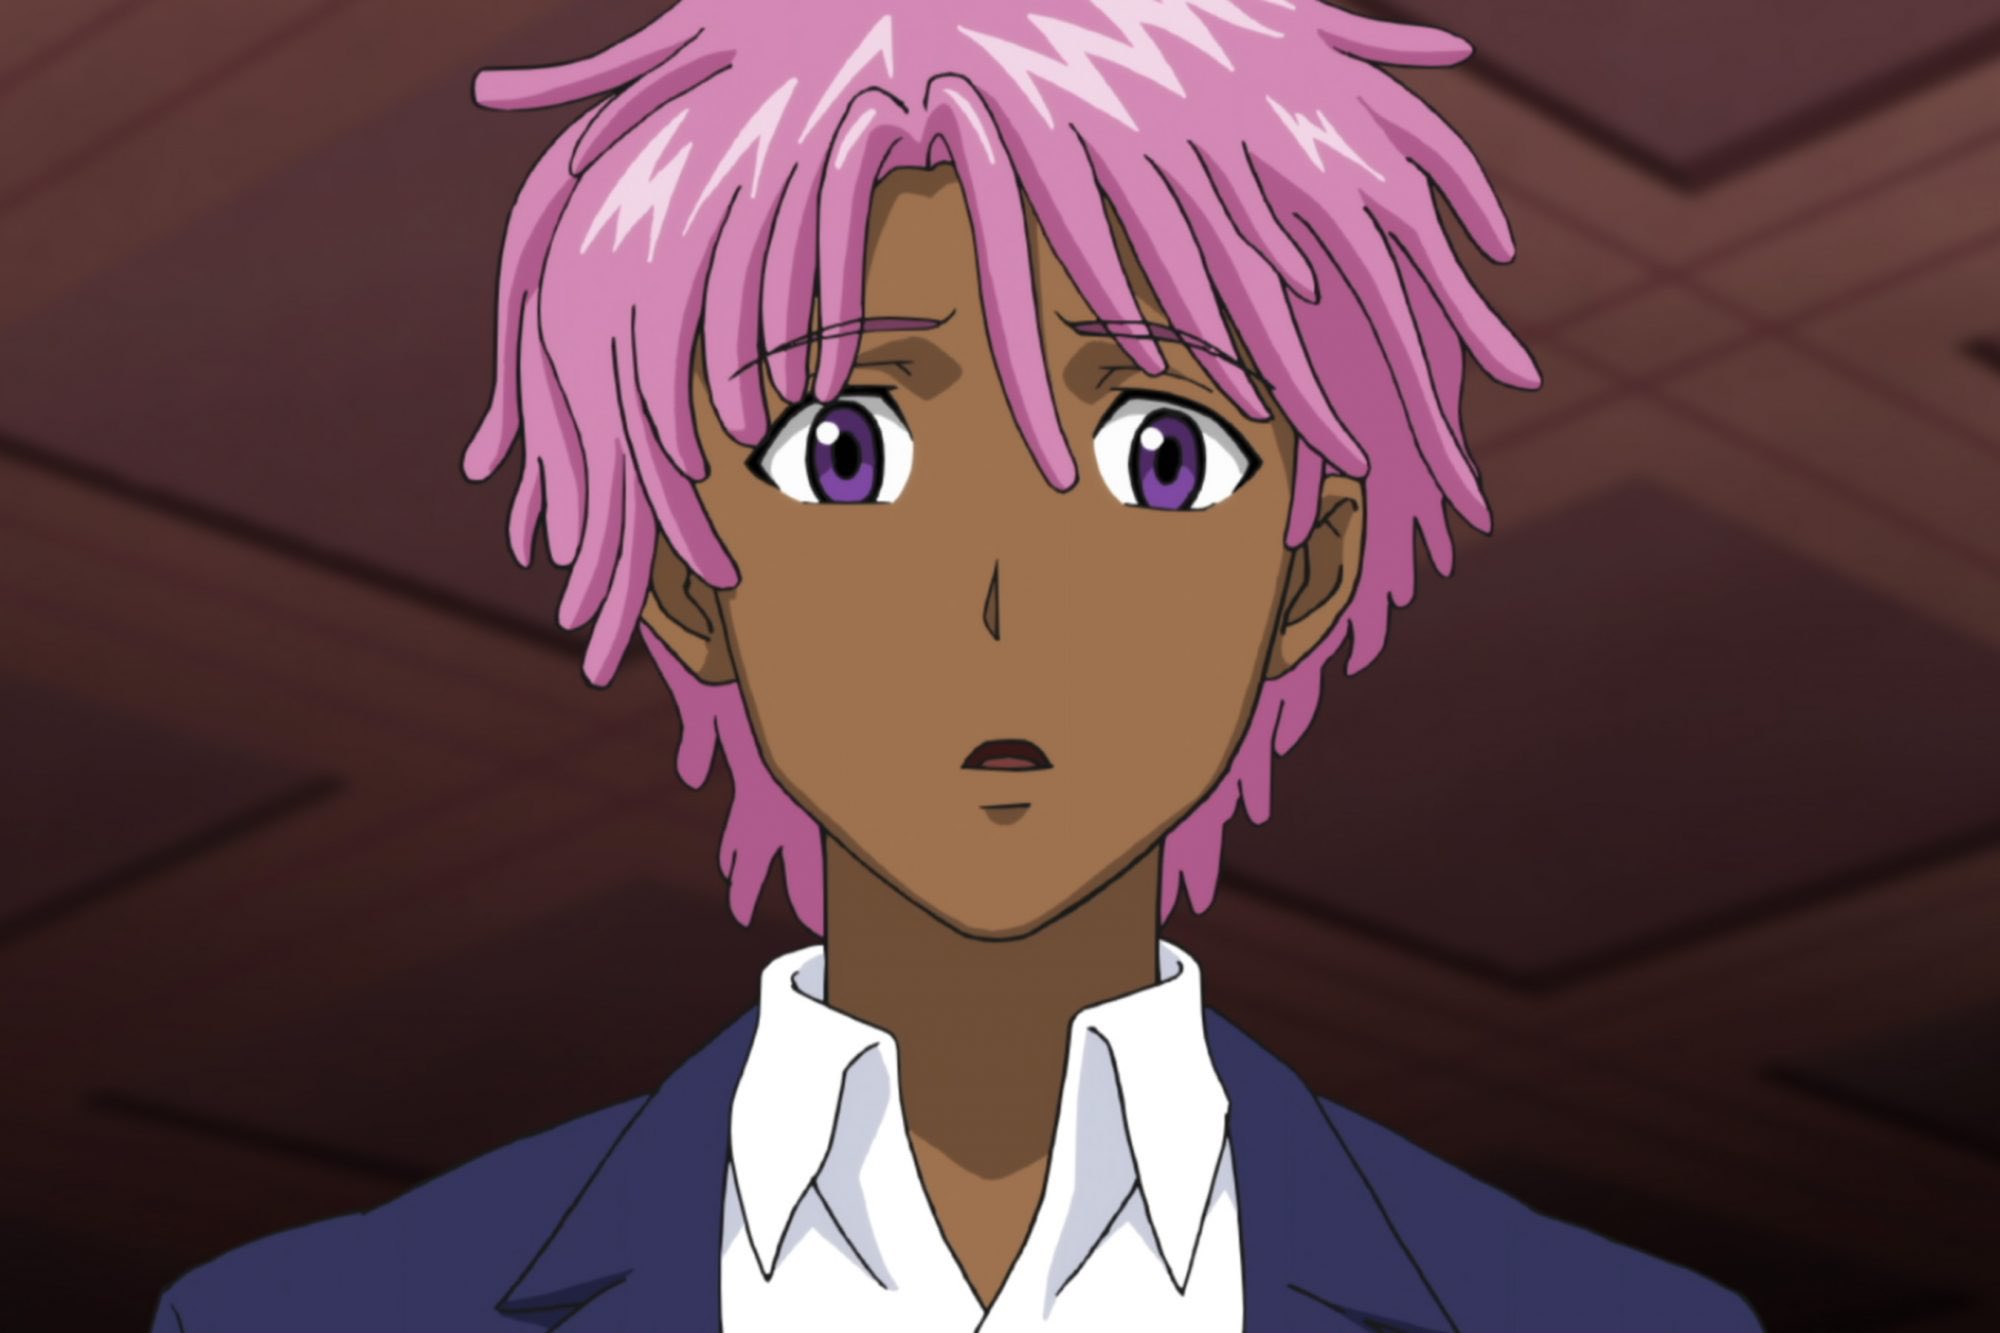 Download Pink Hair Anime Boy - Anime Boy With Pink Hair PNG Image with No  Background - PNGkey.com